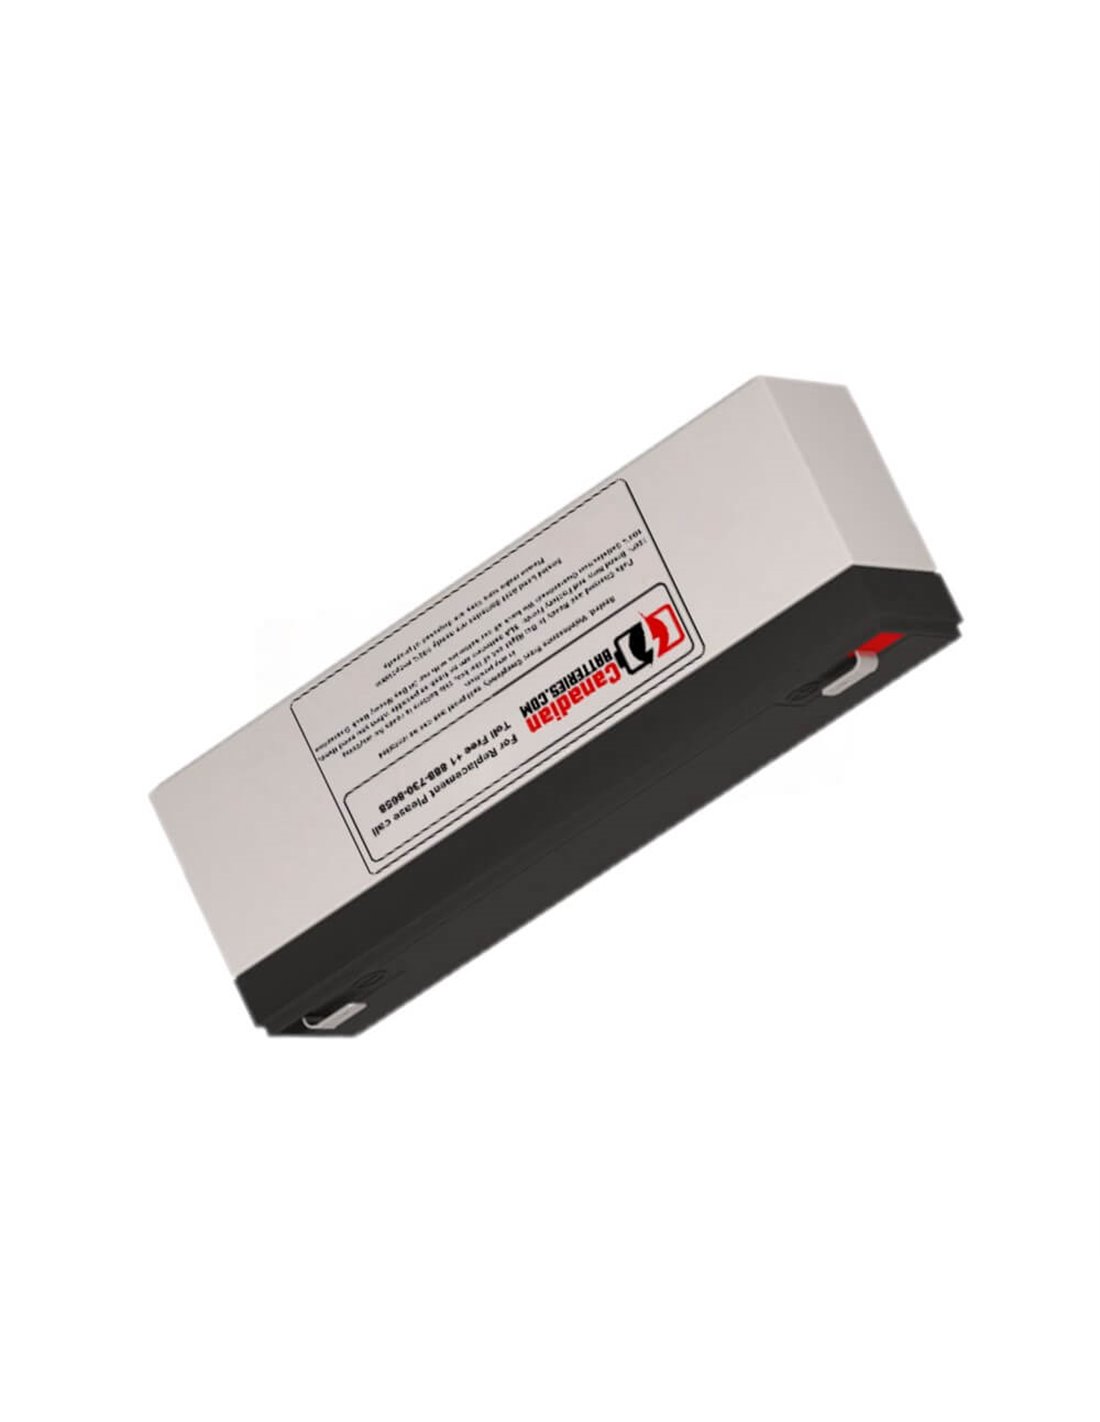 Battery for Intellipower Nd Nt121 UPS, 1 x 12V, 2.3Ah - 27.6Wh